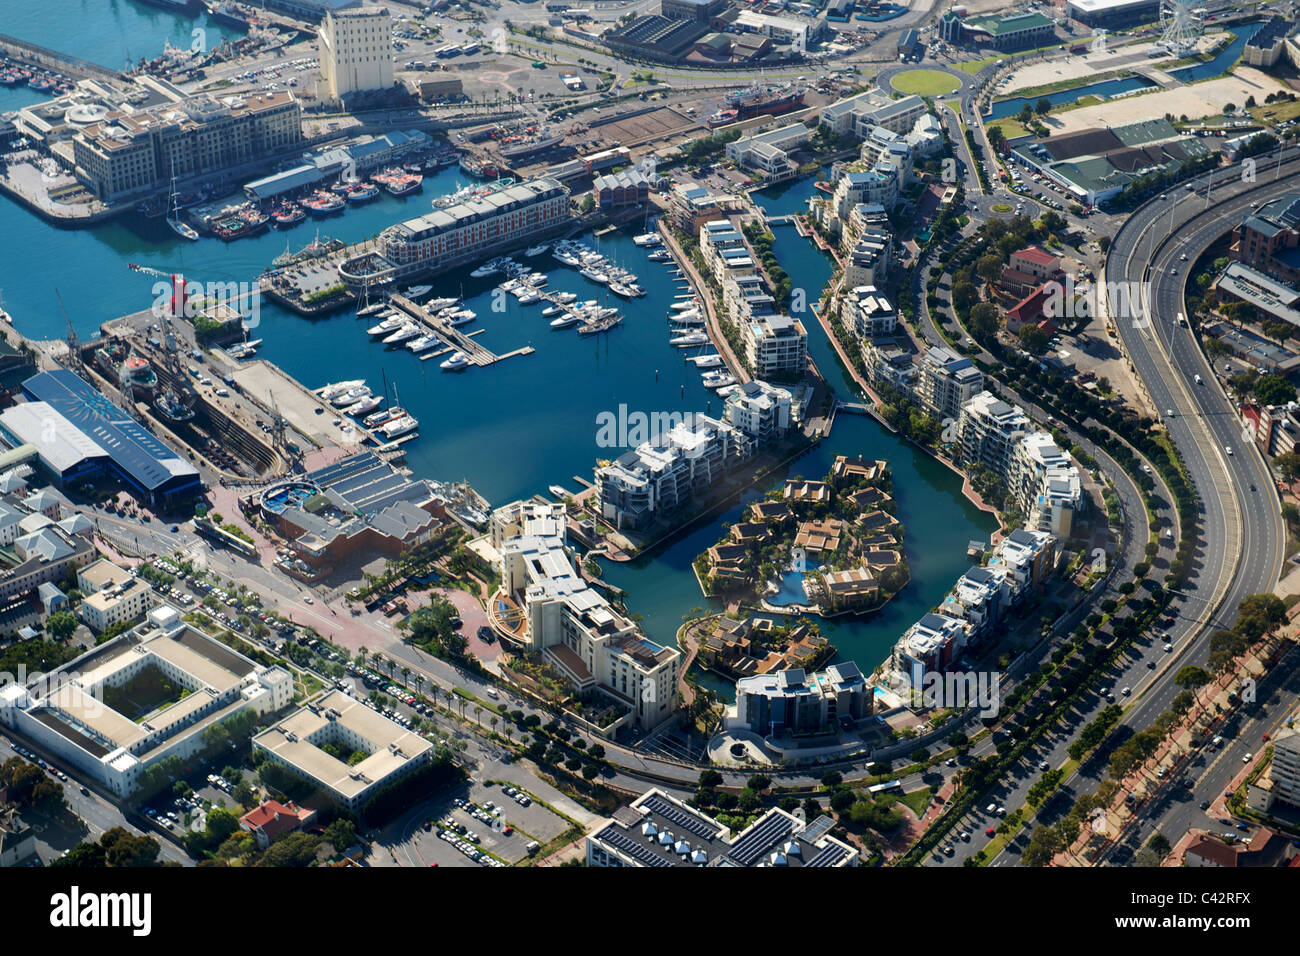 Aerial view of the Waterfront marina in Cape Town, South Africa. Stock Photo